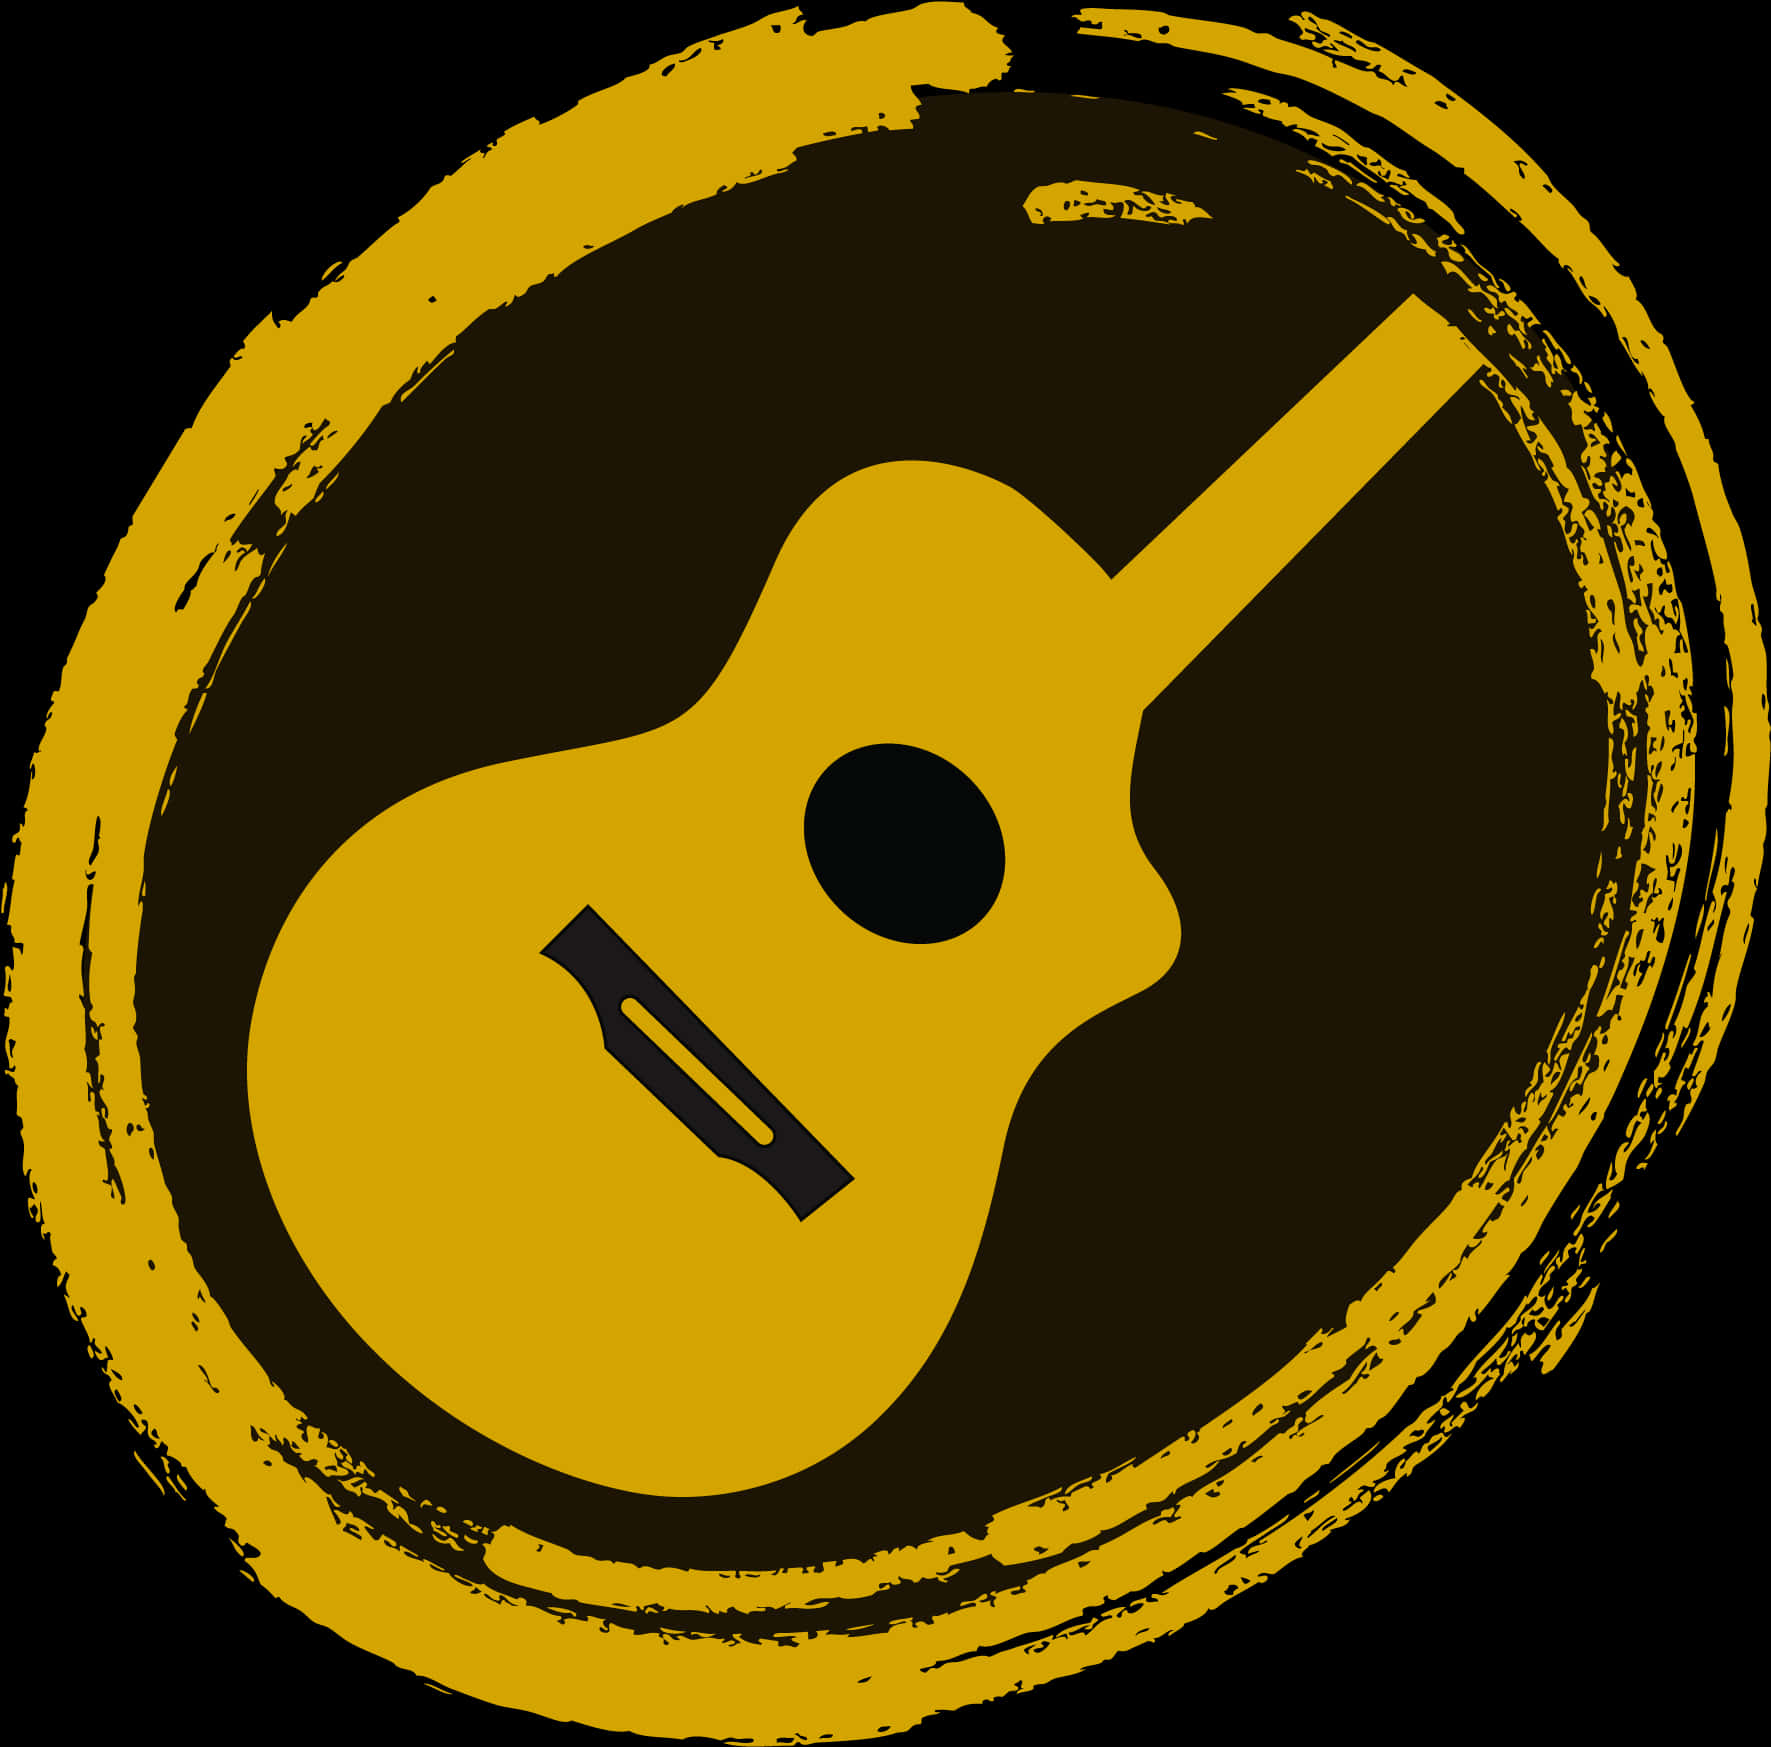 Abstract Guitar Icon Yellowand Black PNG